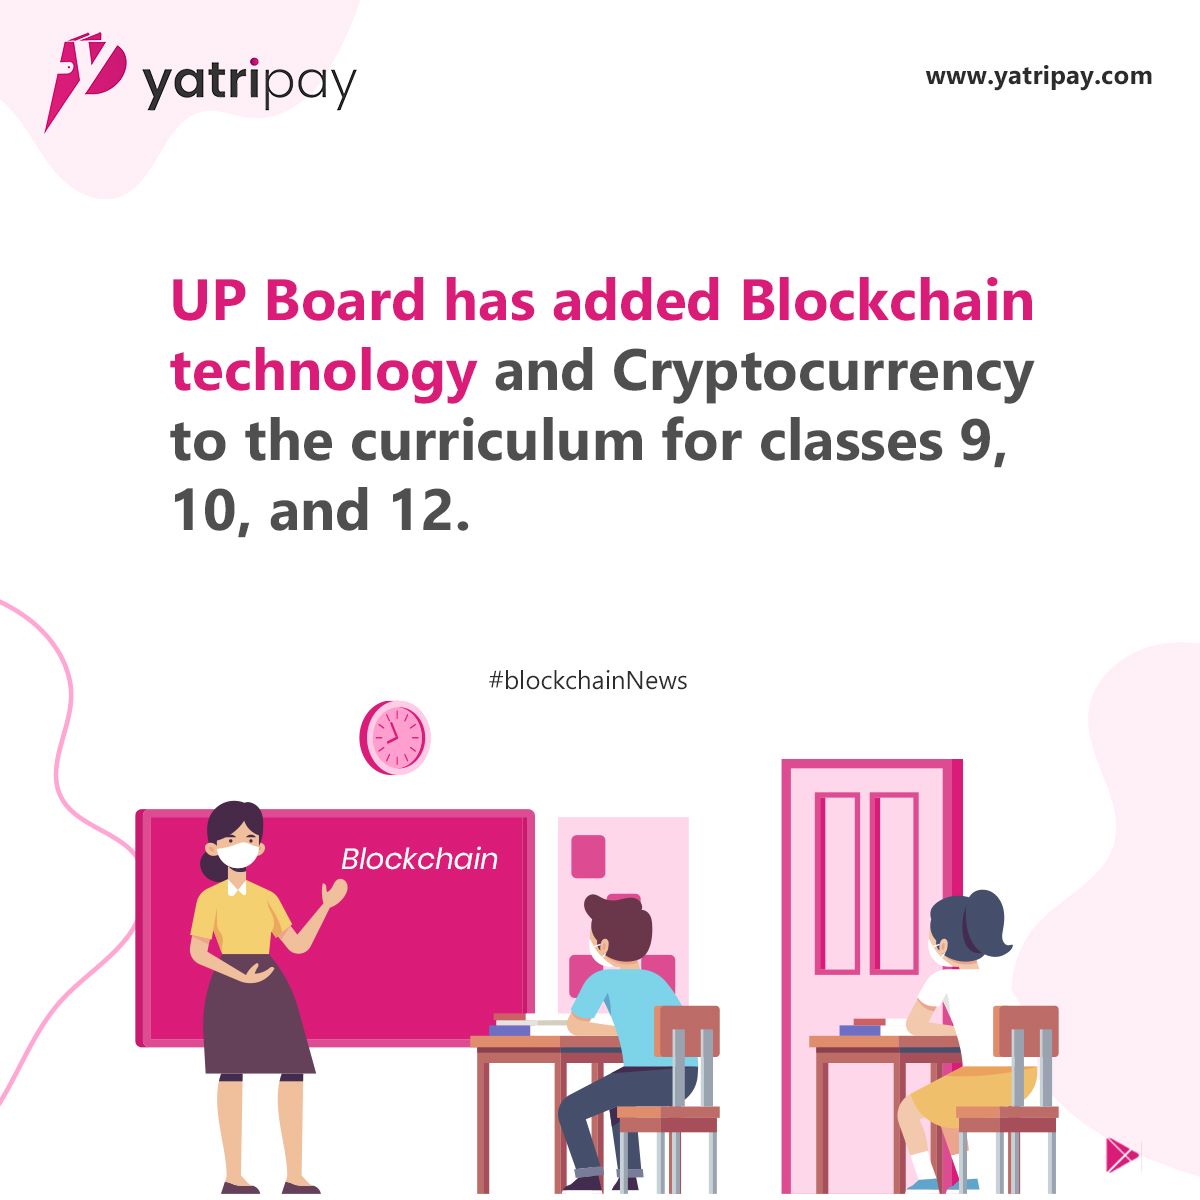 UP Board embraces technology of the future: introduces Blockchain and Cryptocurrency in school curriculum
.
📷Download today
play.google.com/store/apps/det…...
.
#upboard #technology #YTP #cryptocurrency #digitalpayment #downloadapp #downloadnow #yatripay #rewards #viralpost #exlore…